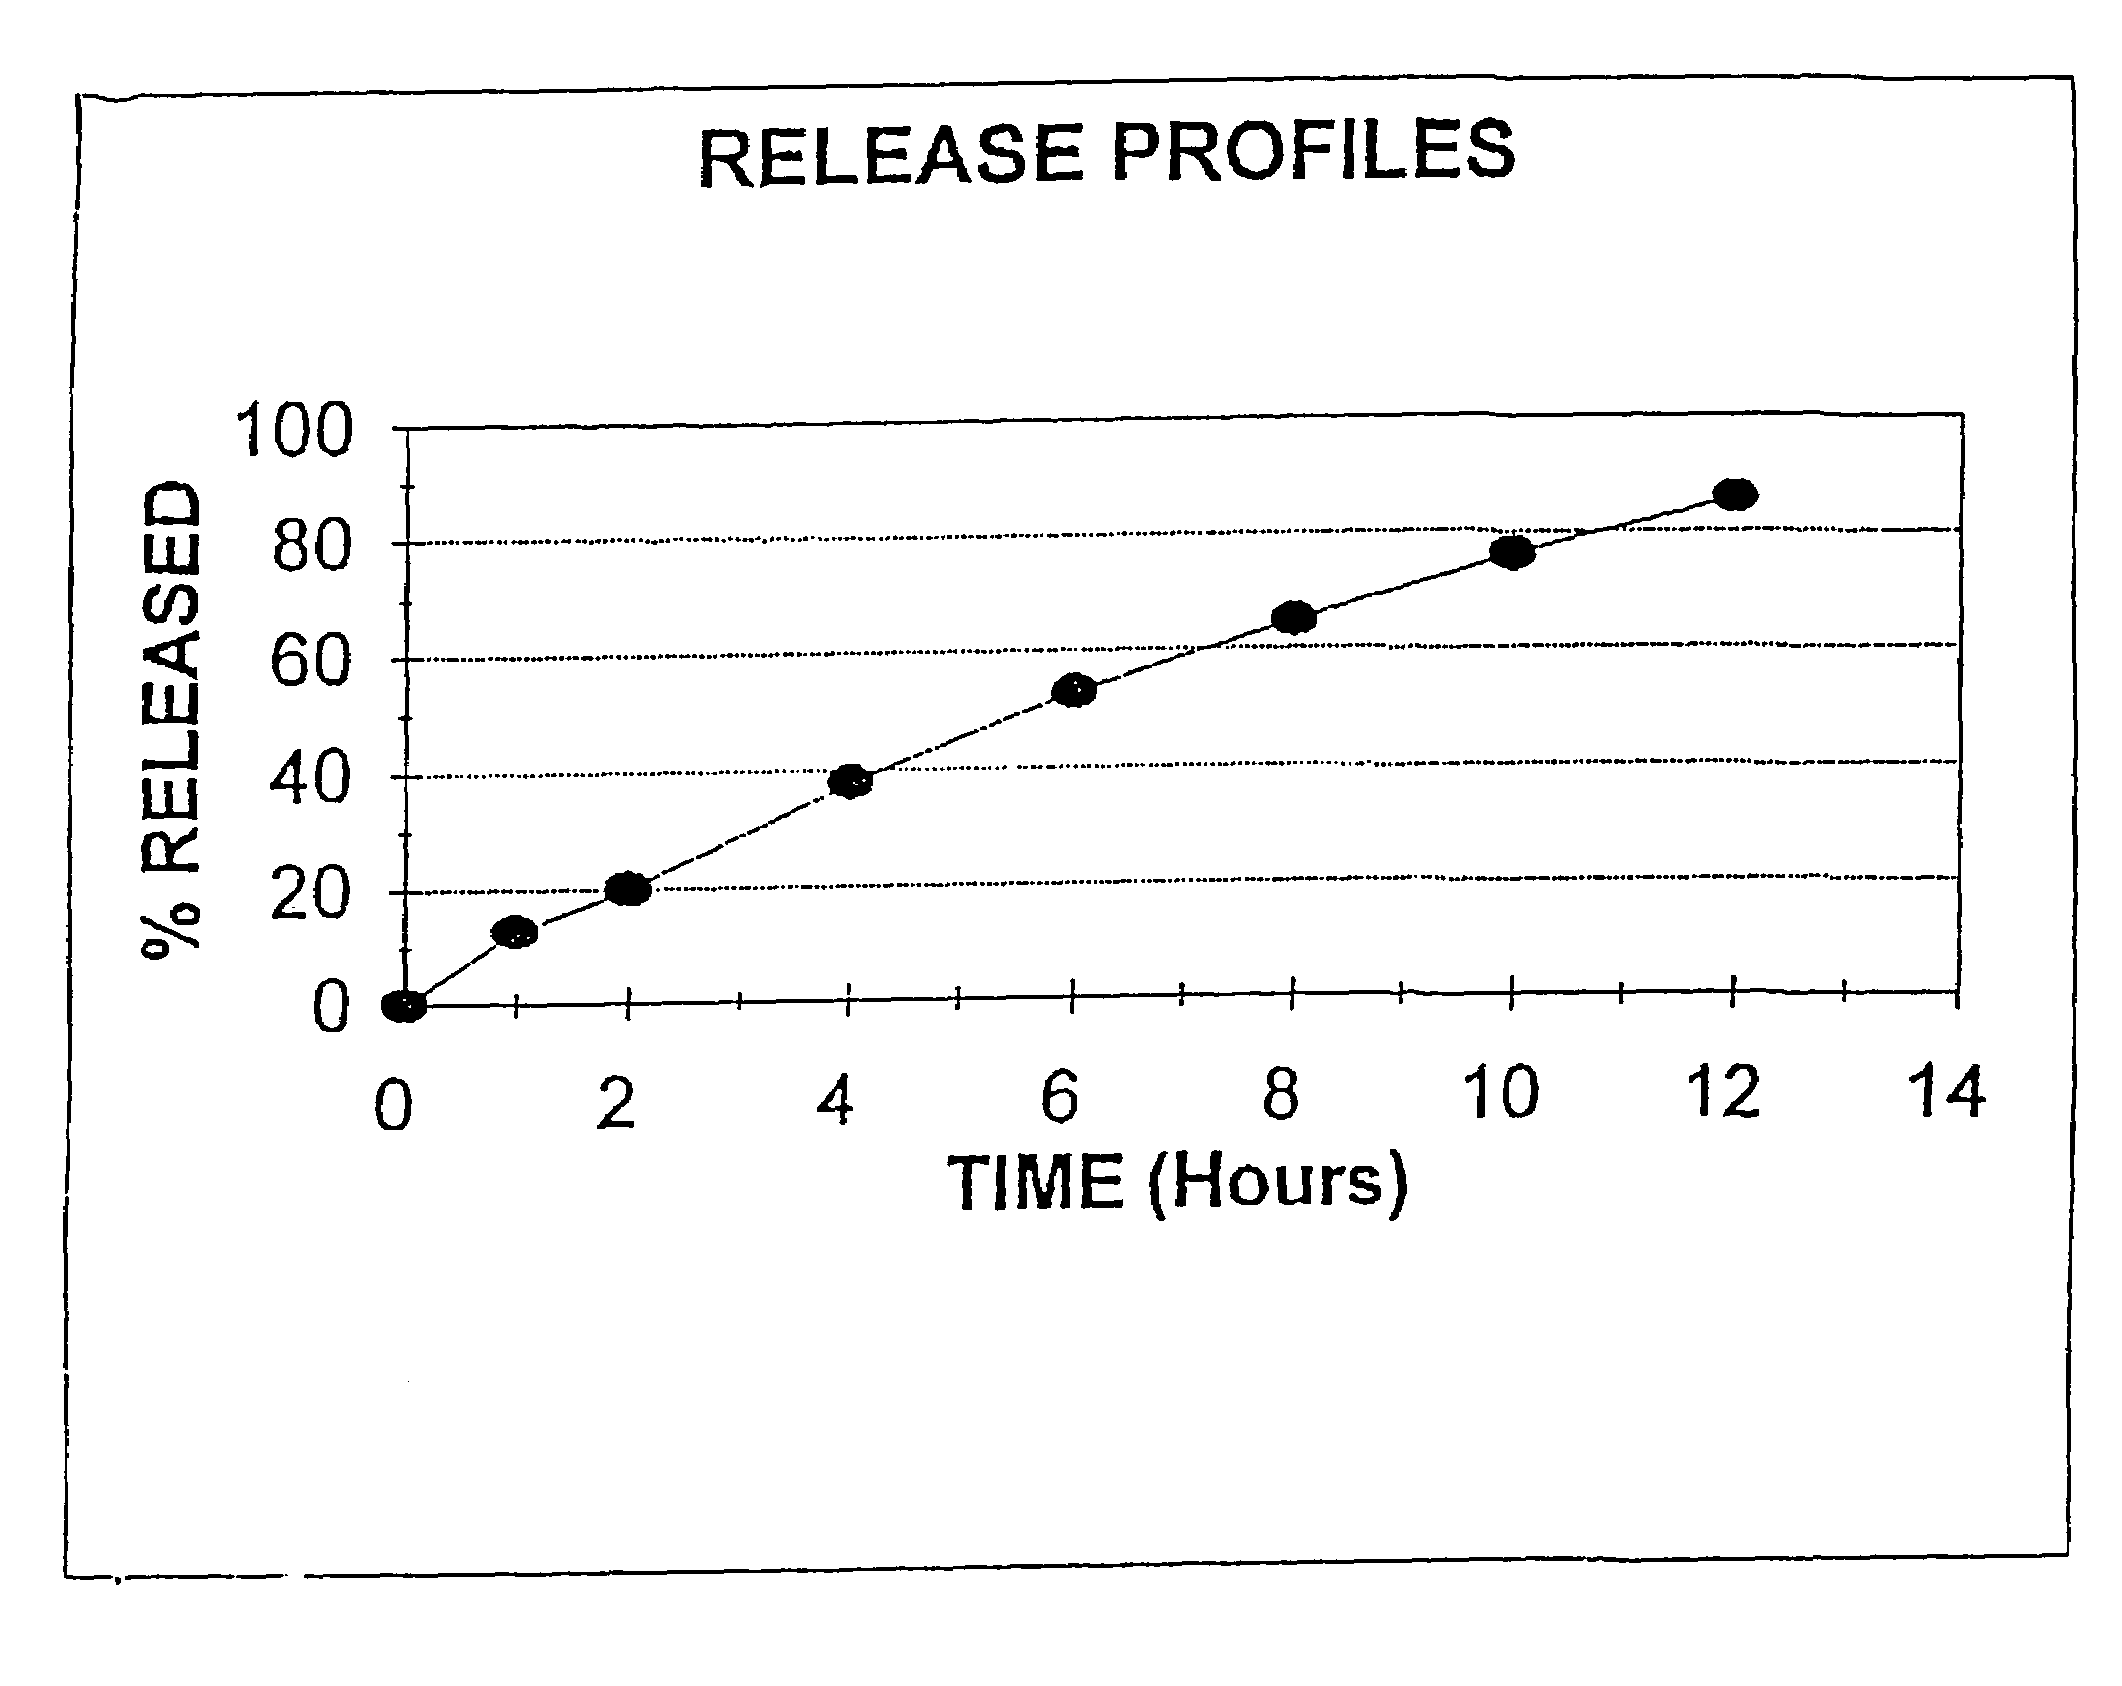 Process for preparing sustained release tablets